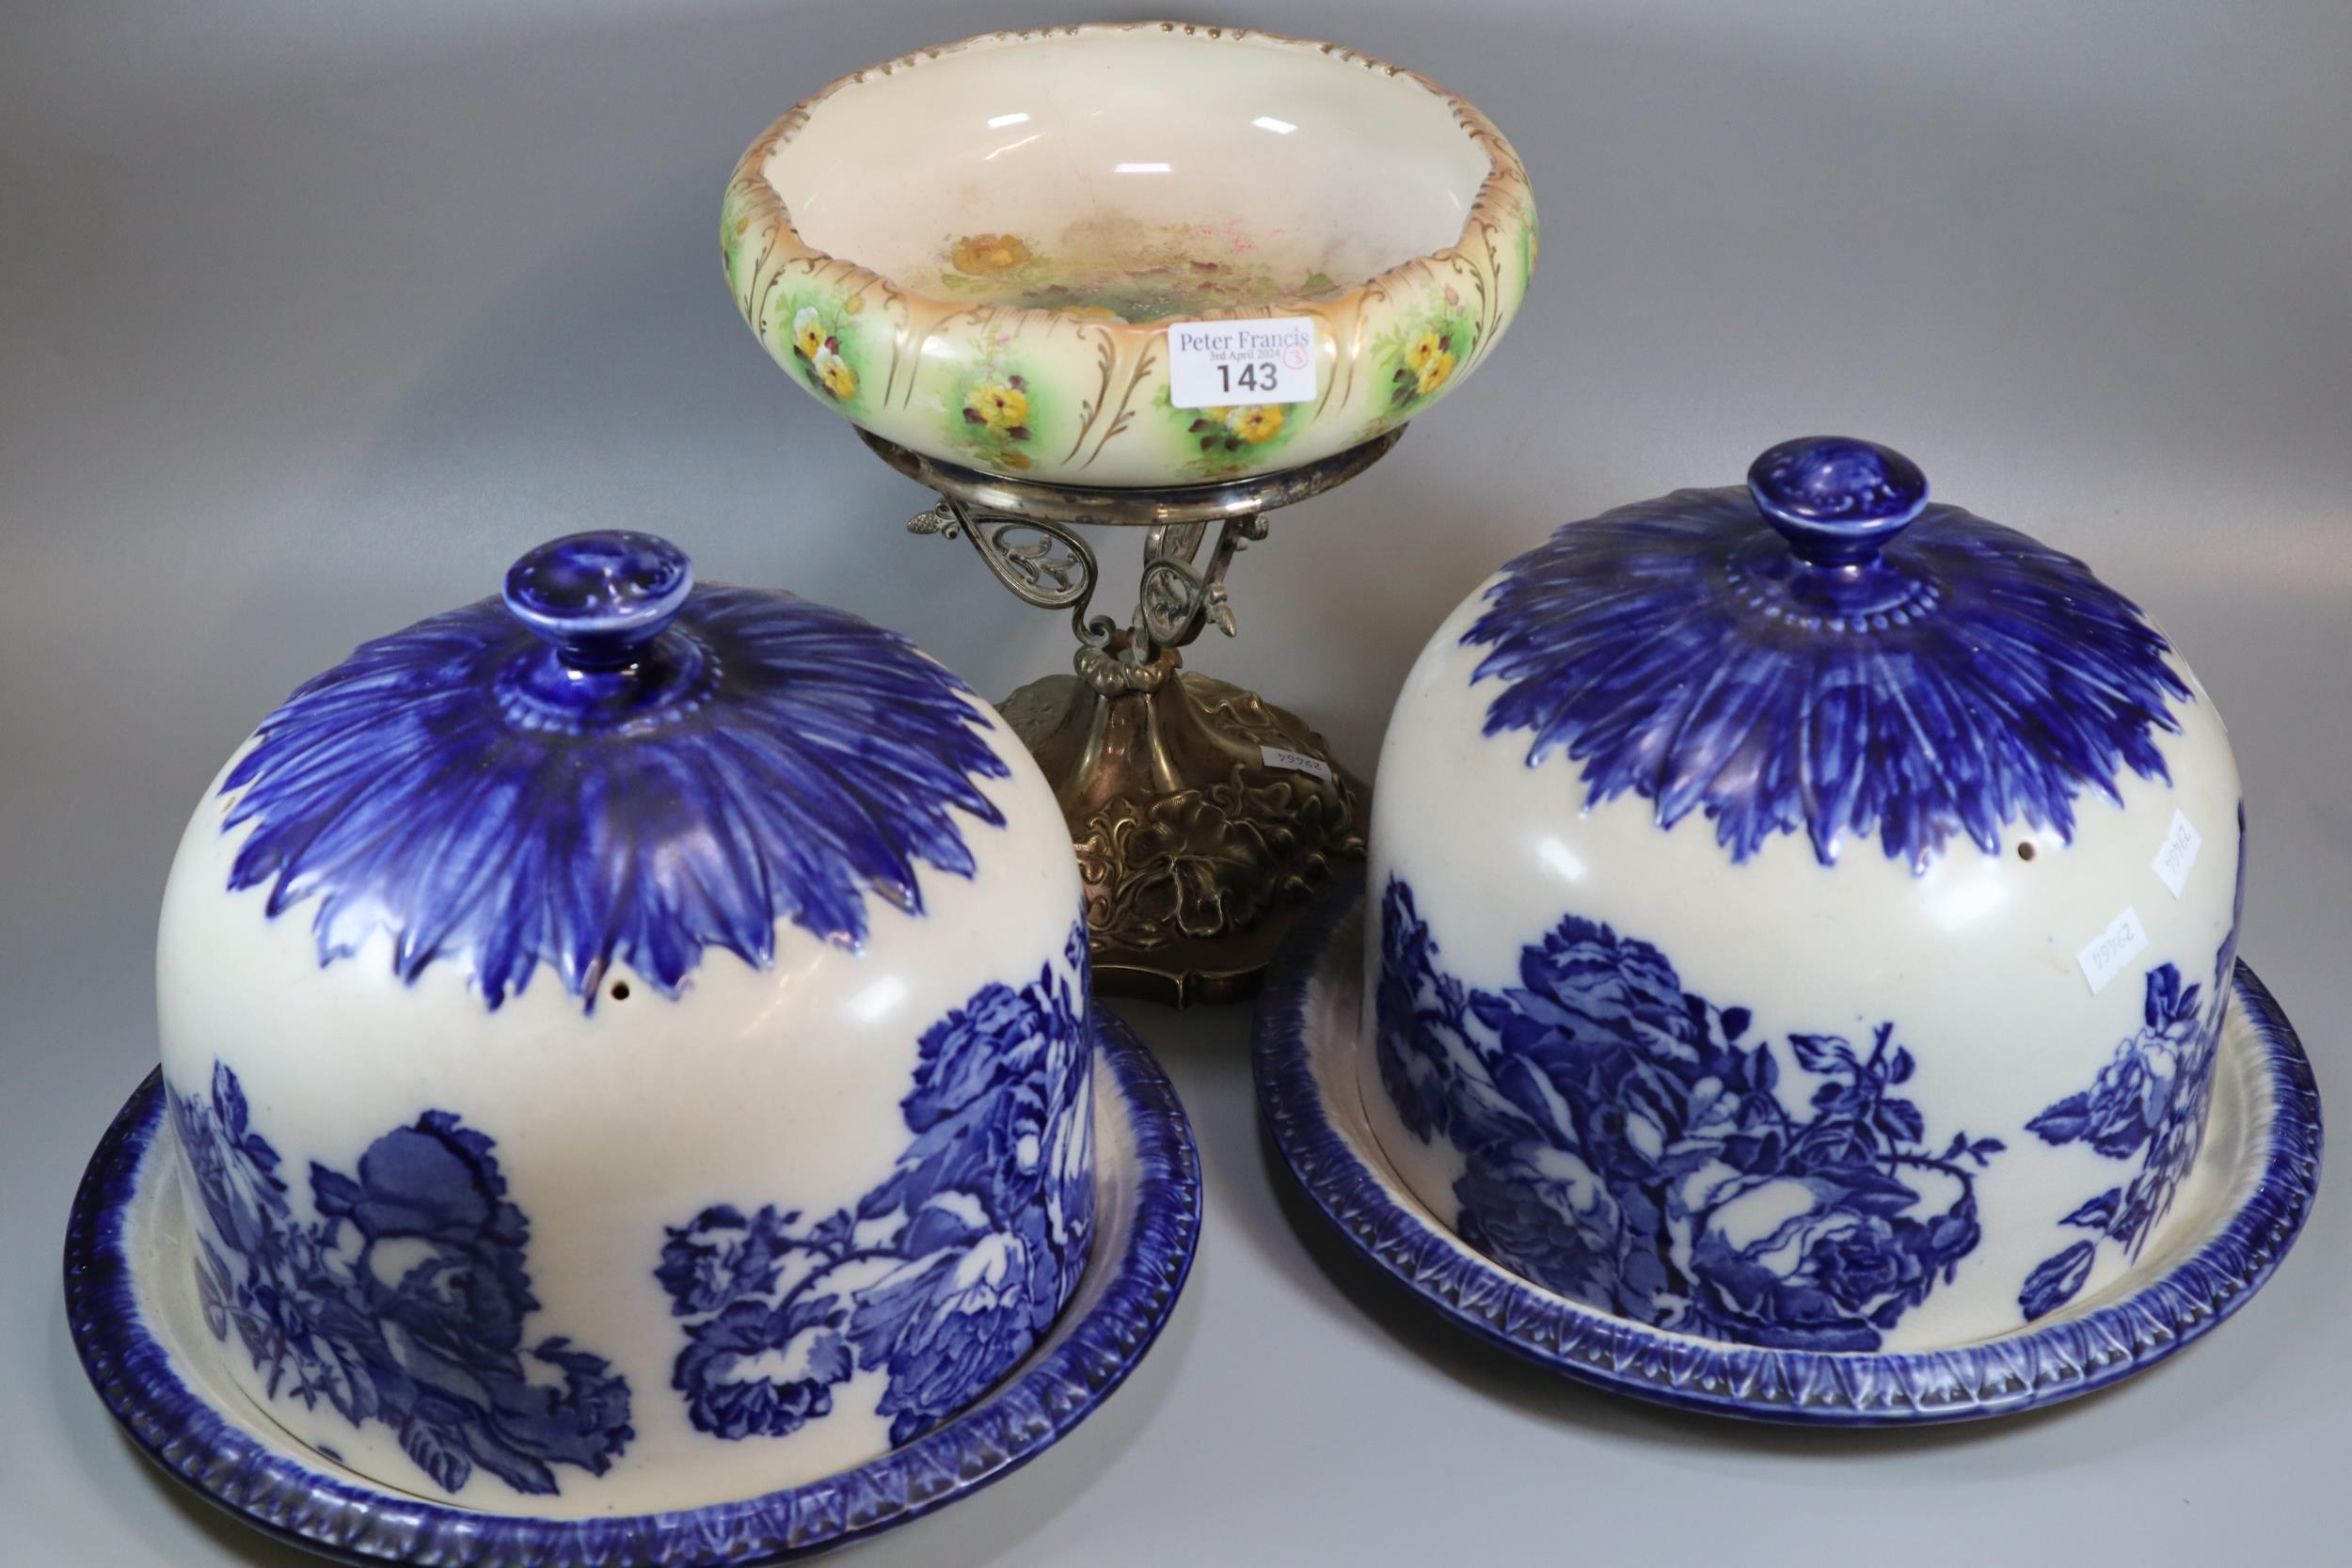 Pair of 19th century blue and white transfer printed Staffordshire cake domes on stands, together